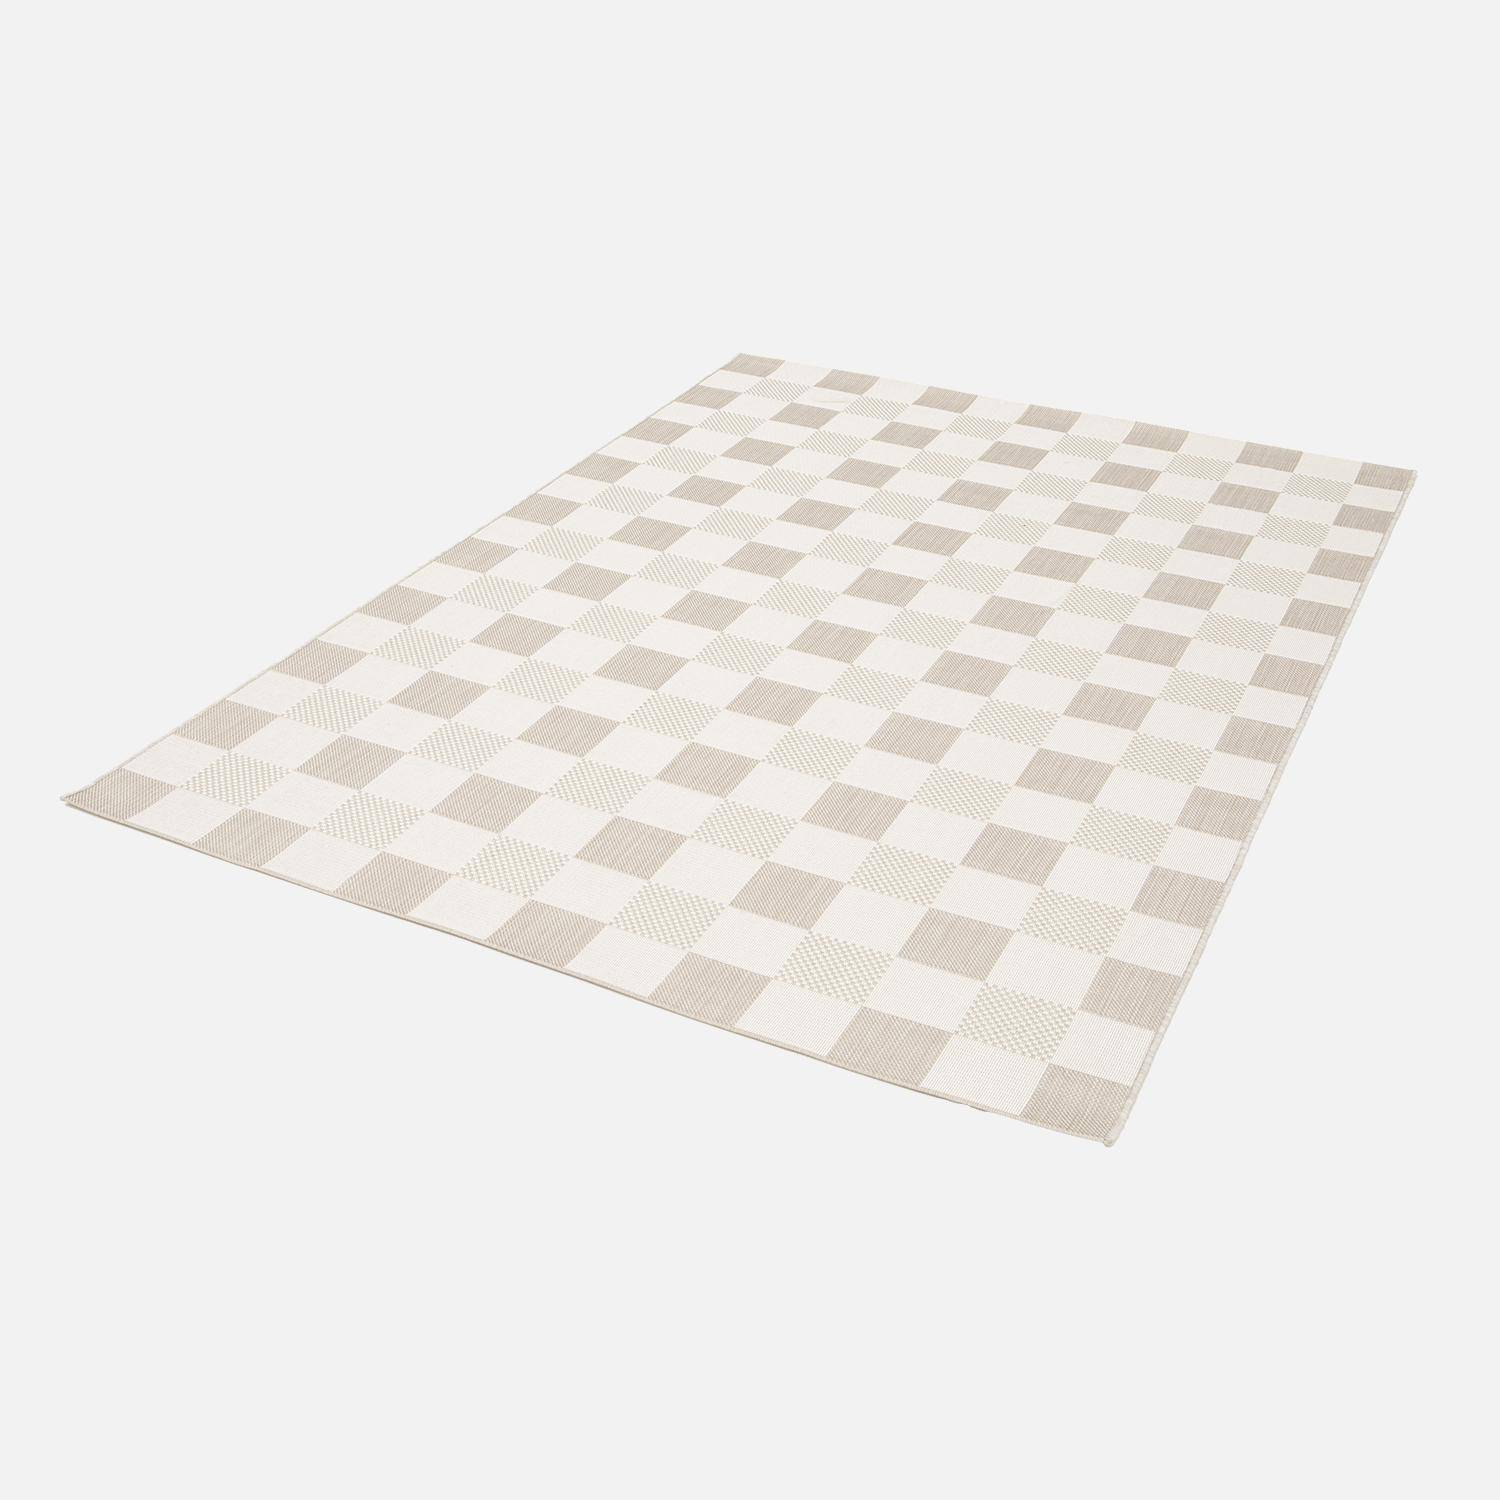 Indoor/outdoor carpet with beige chequered pattern, recycled polyester, Damian, 120 x 170 cm Photo4